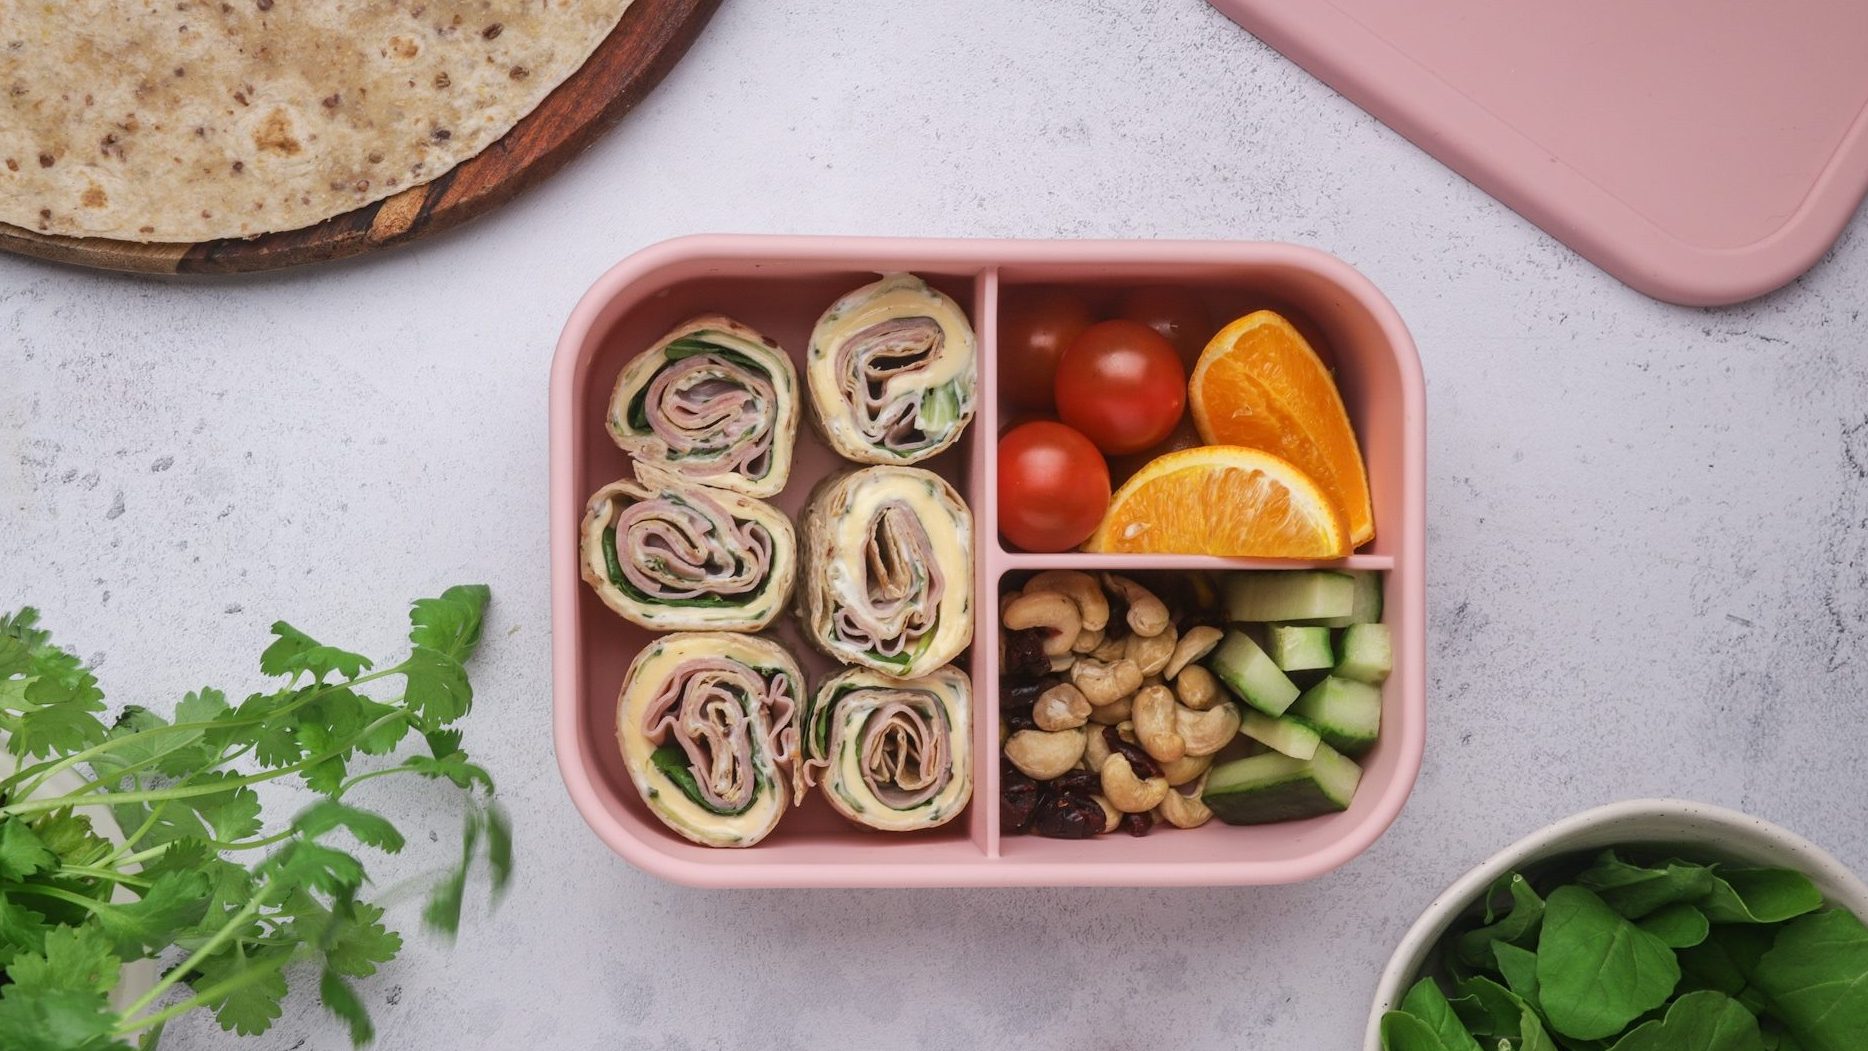 Pink lunch box with six ham pinwheels, mini tomatoes and orange wedges, and vegetable sticks filled.